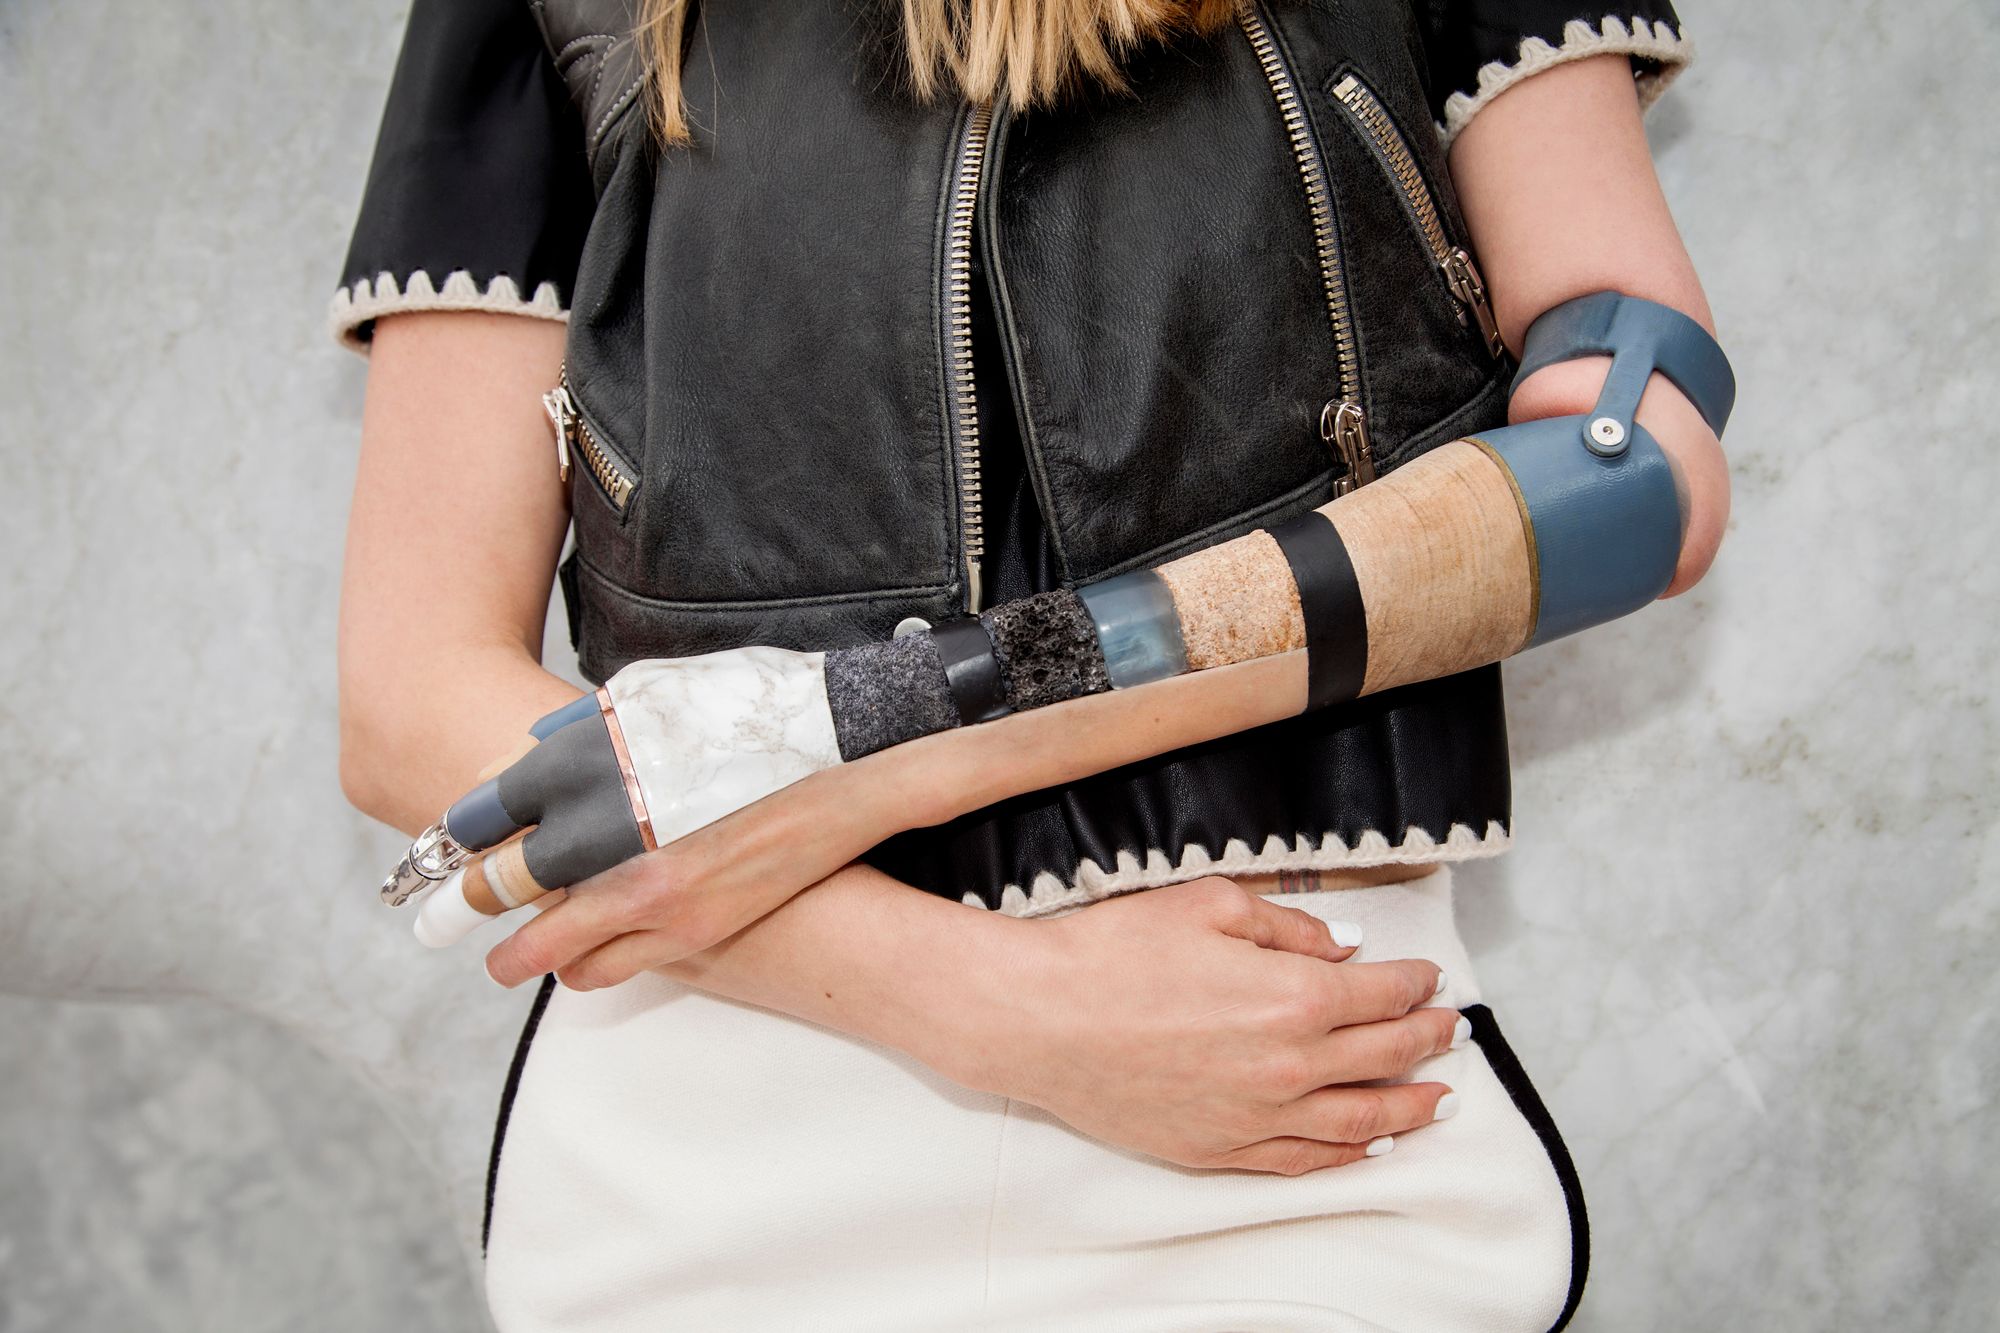 A close-up shows a prosthetic arm that is made up of many different materials and colors.